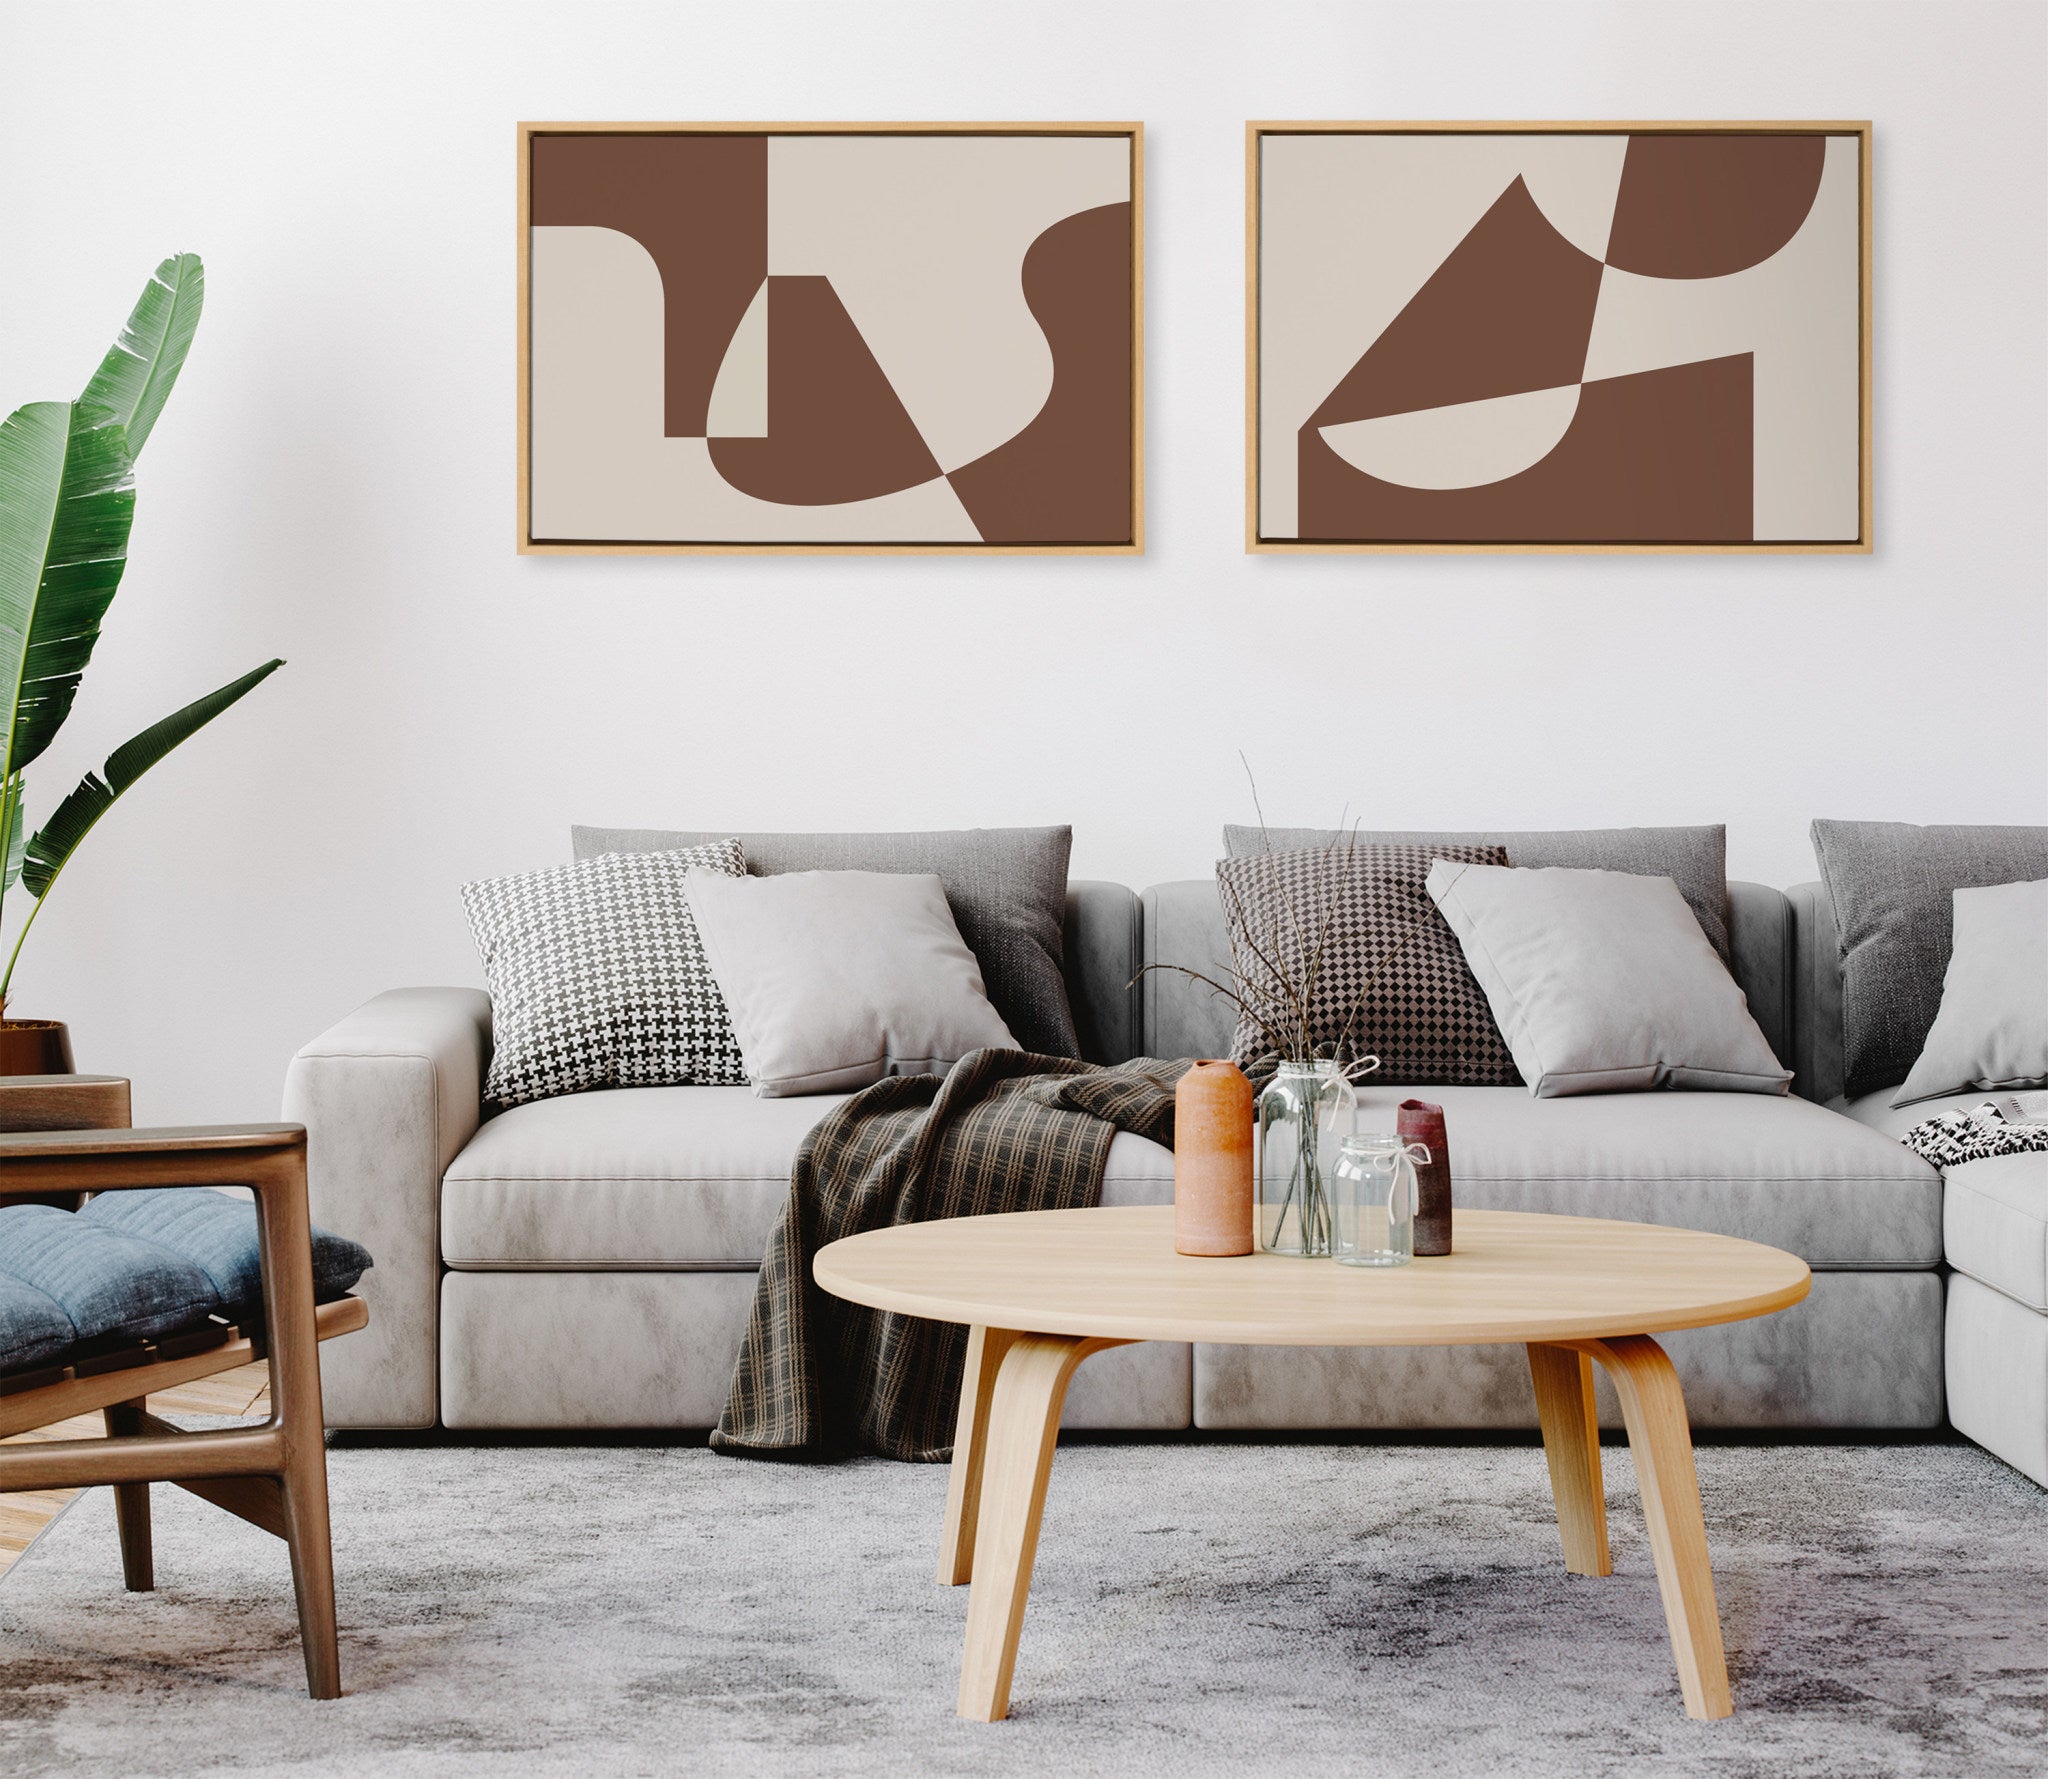 Sylvie Eye Catching Sleek Abstract 4 Brown and Beige Framed Canvas by The Creative Bunch Studio